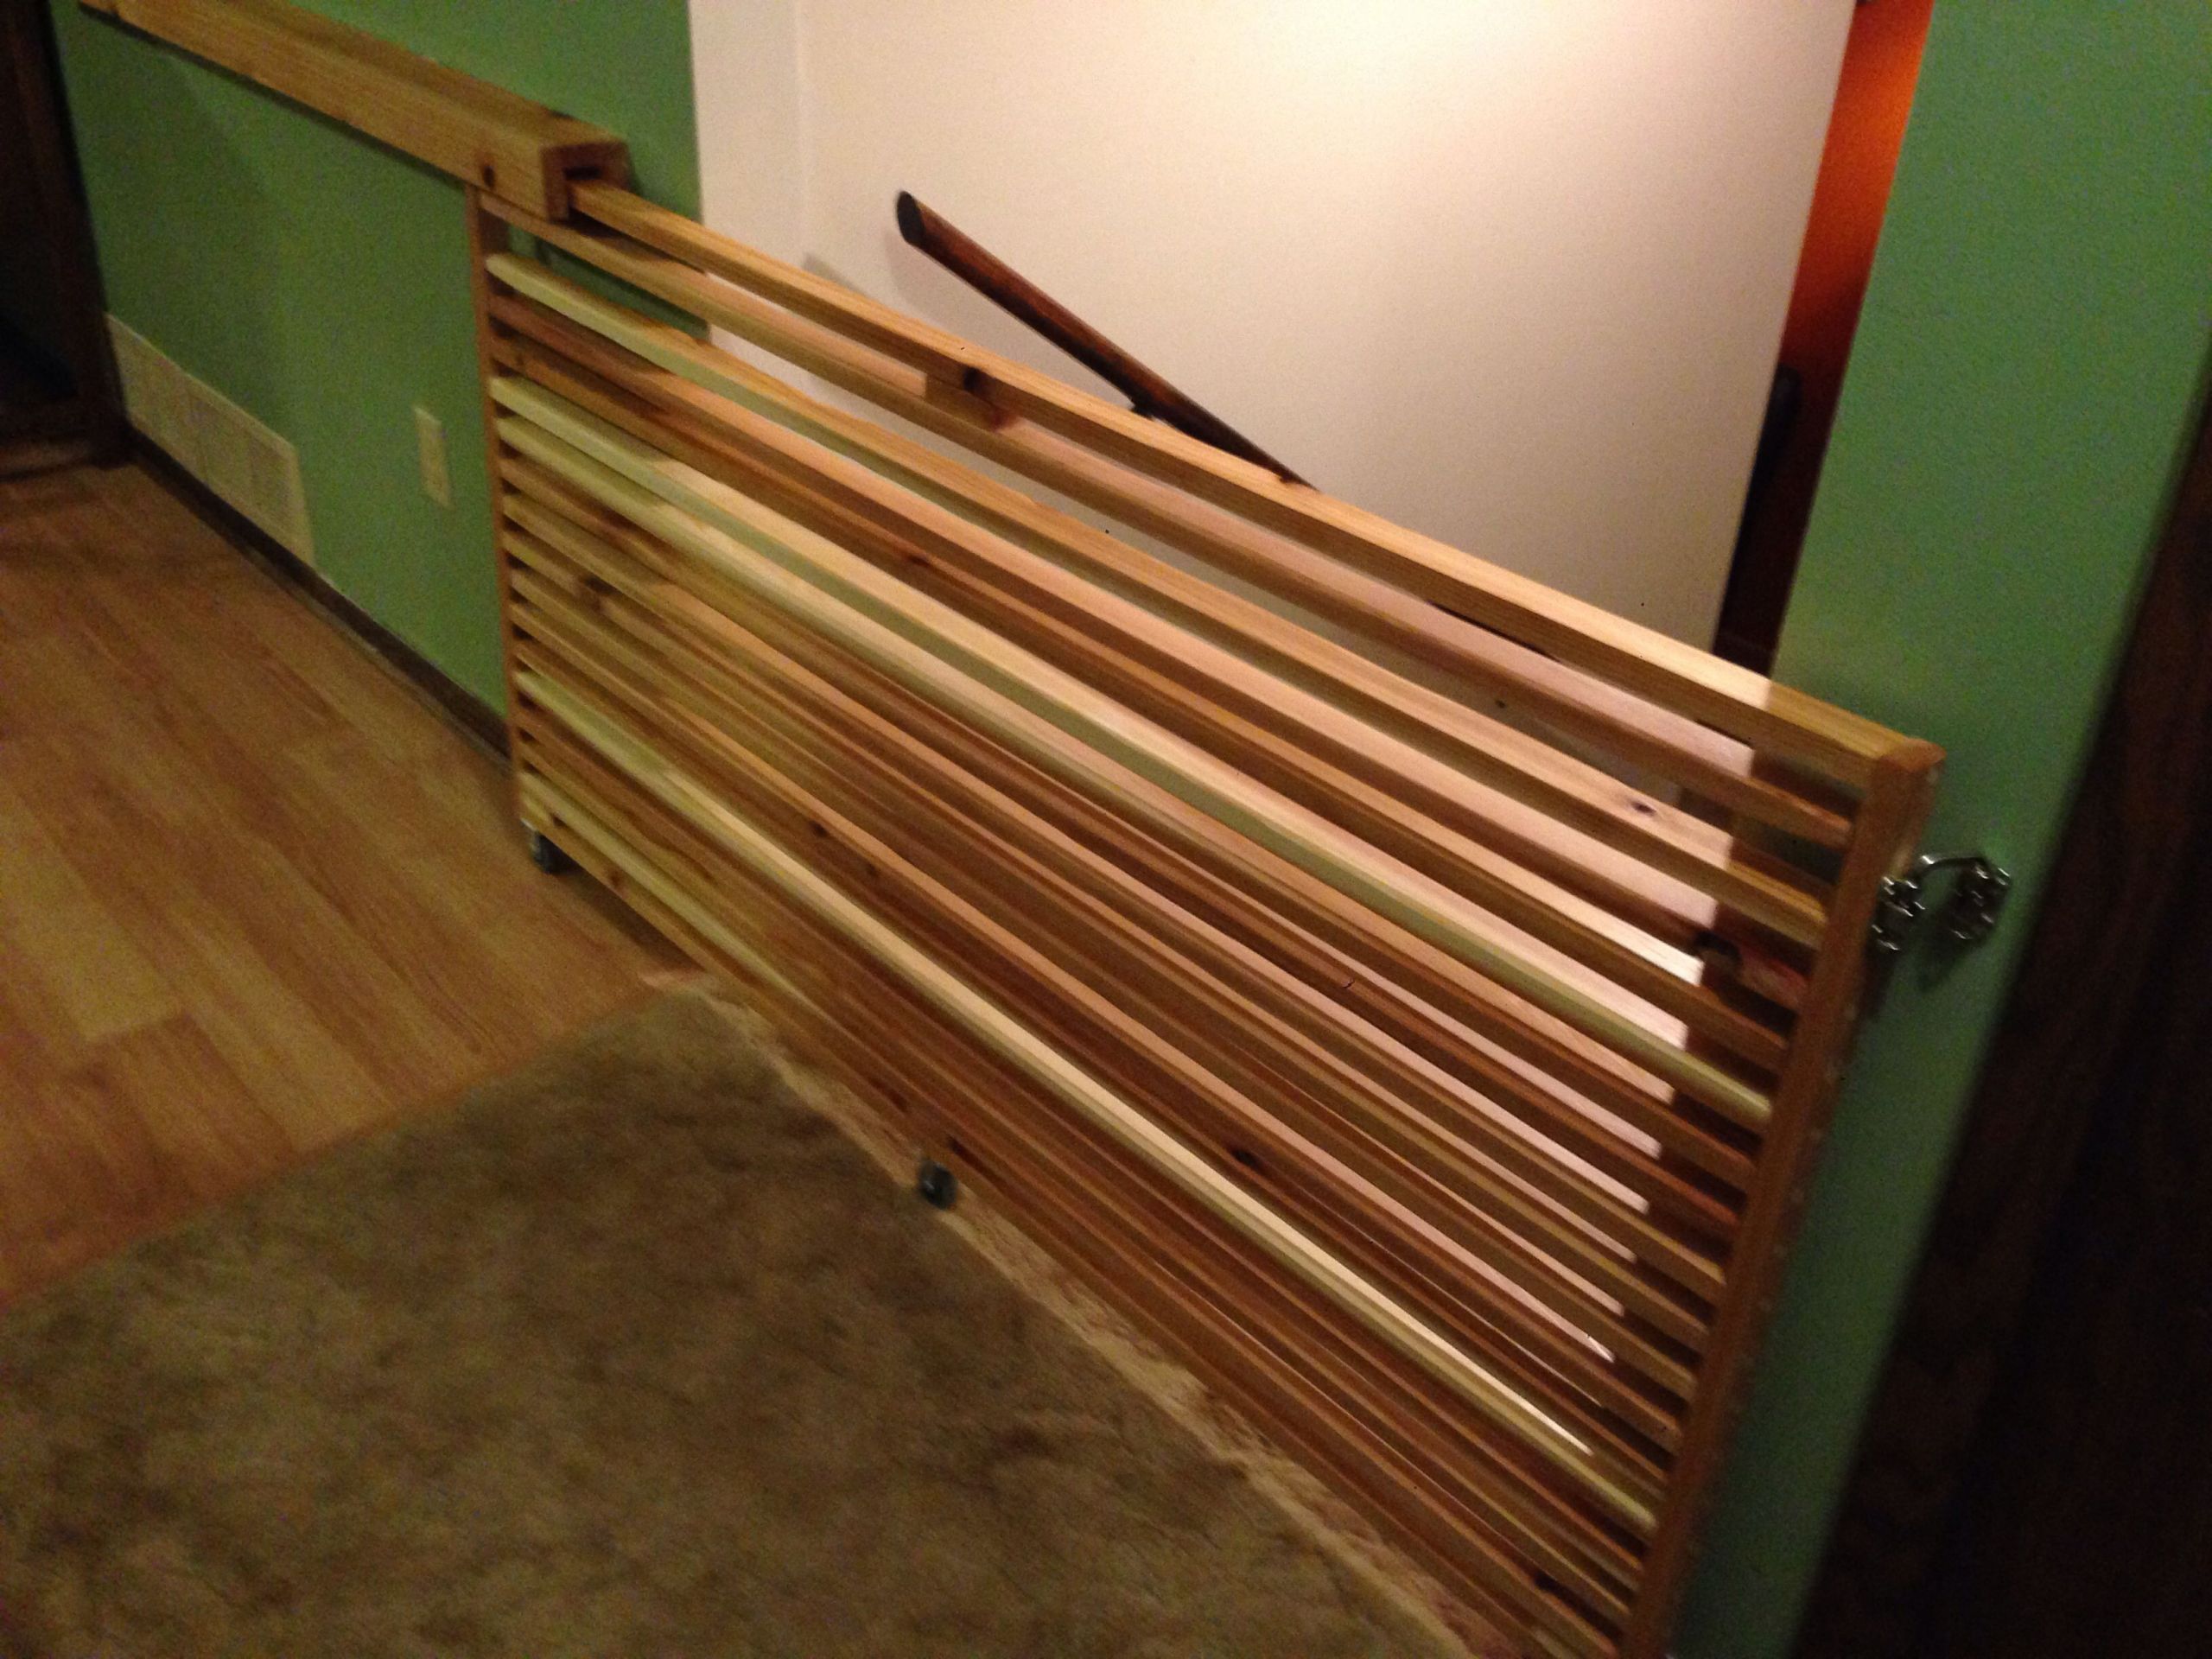 DIY Sliding Baby Gate
 Sliding gate for the top of stairs Made of cedar 1x2